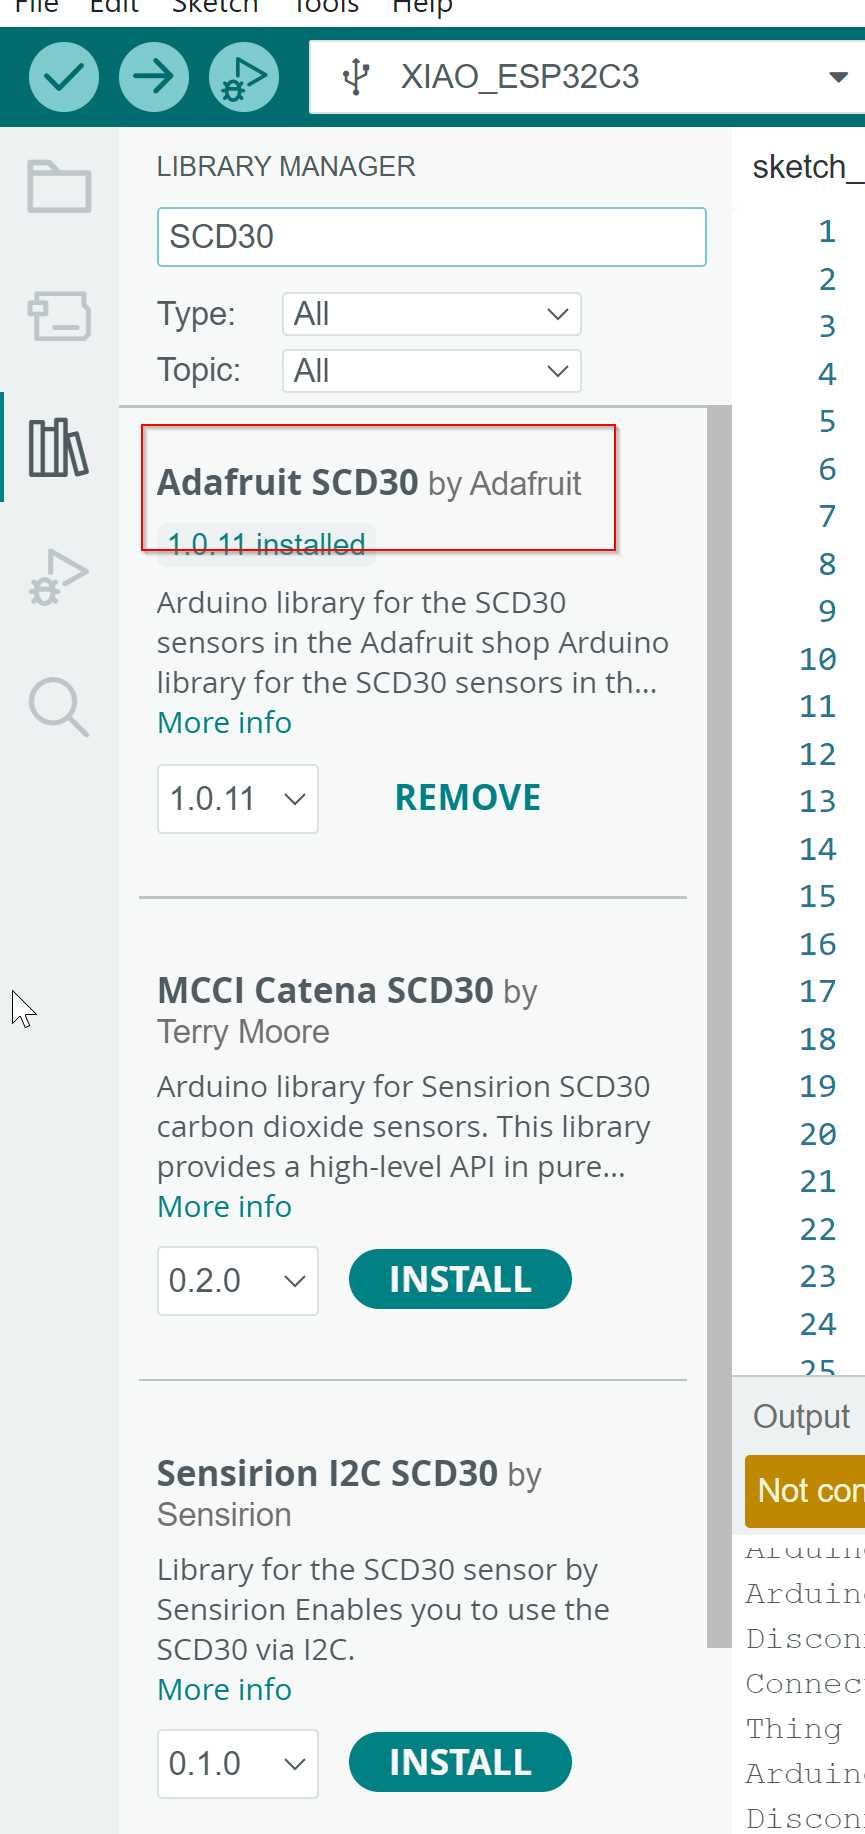 Downloading the adafruit SCD30 library